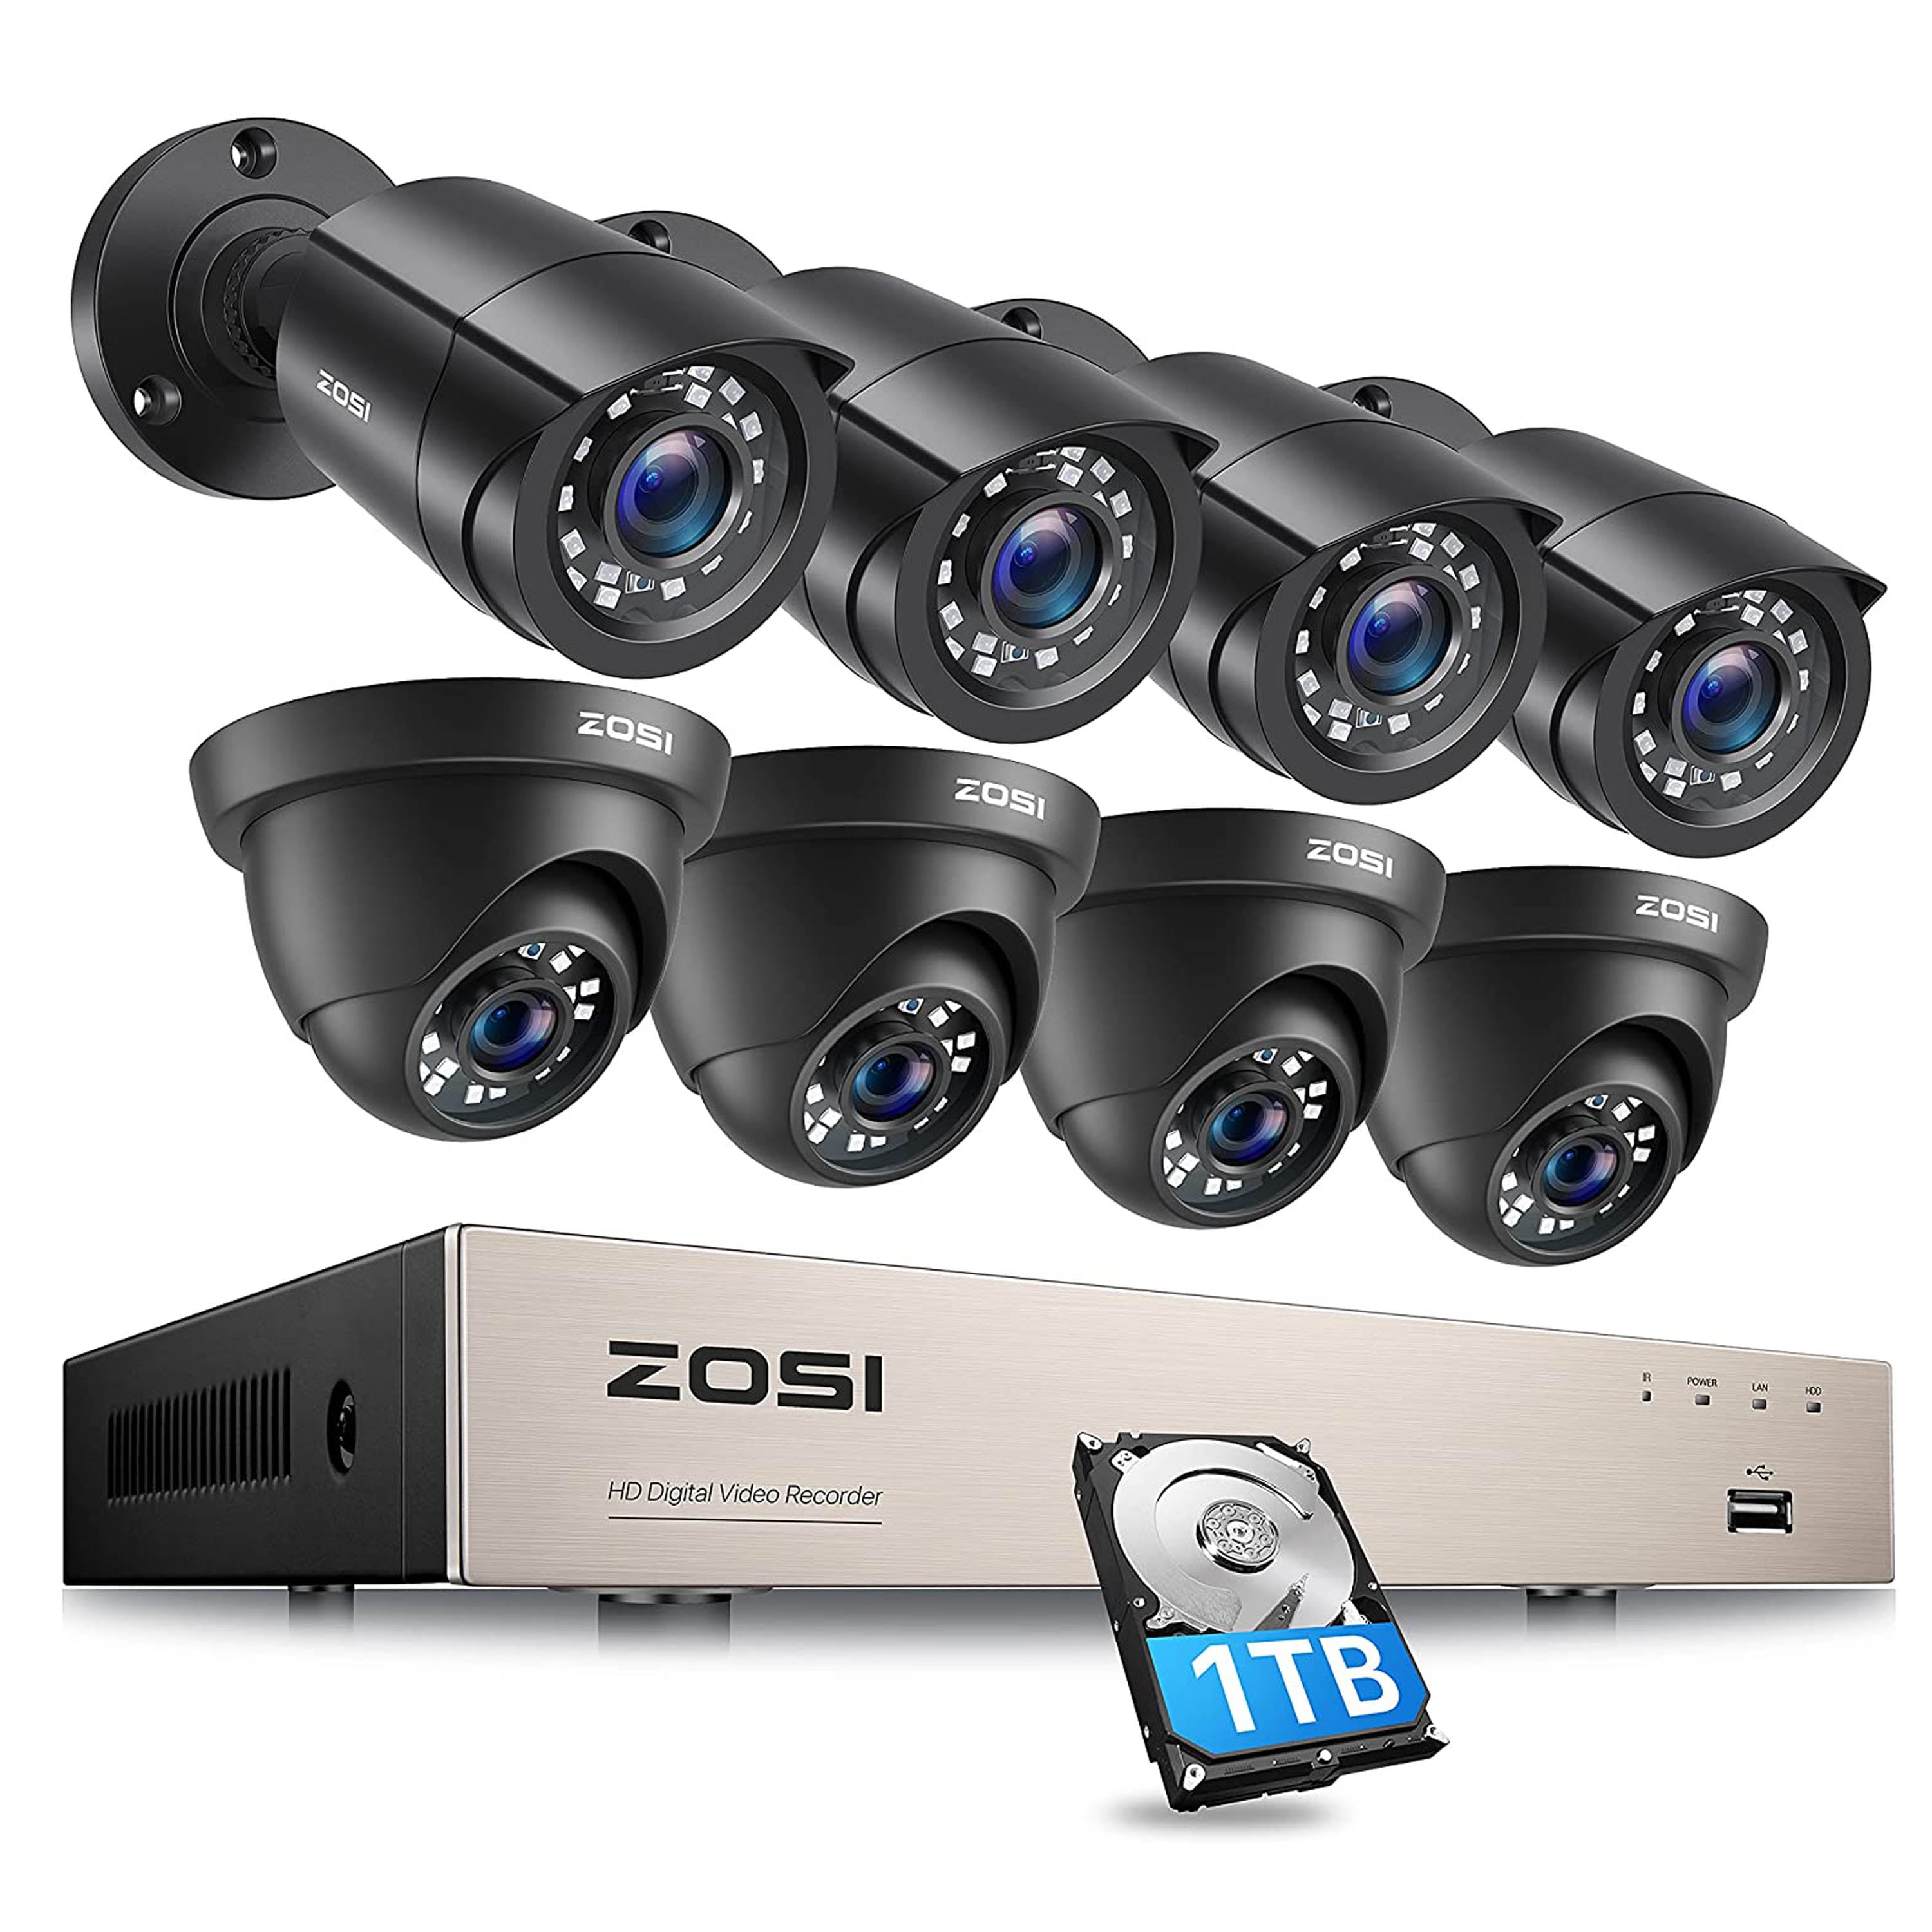 ZOSI 8CH 5MP Home Security Cameras System,H.265 5MP 8 Channel 5MP CCTV DVR Recorder with 1TB Hard Drive,4pcs 2K+ Wired Indoor Outdoor CCTV Cameras with 80ft Night Vision for 24-7 Recording 